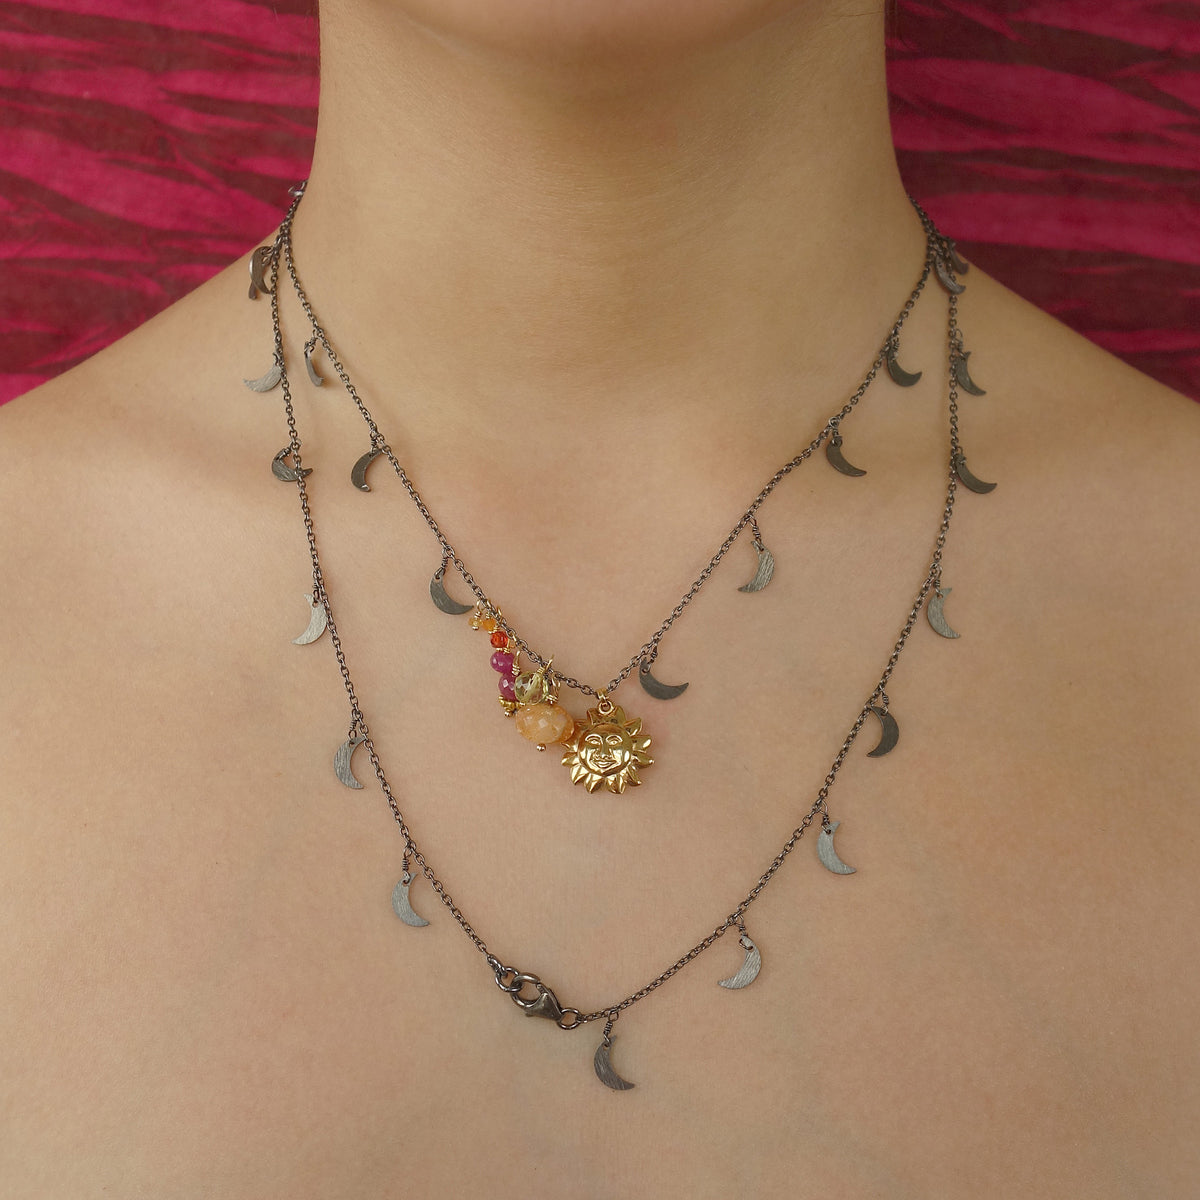 Here Comes the Sun gold, sunstone, ruby necklace